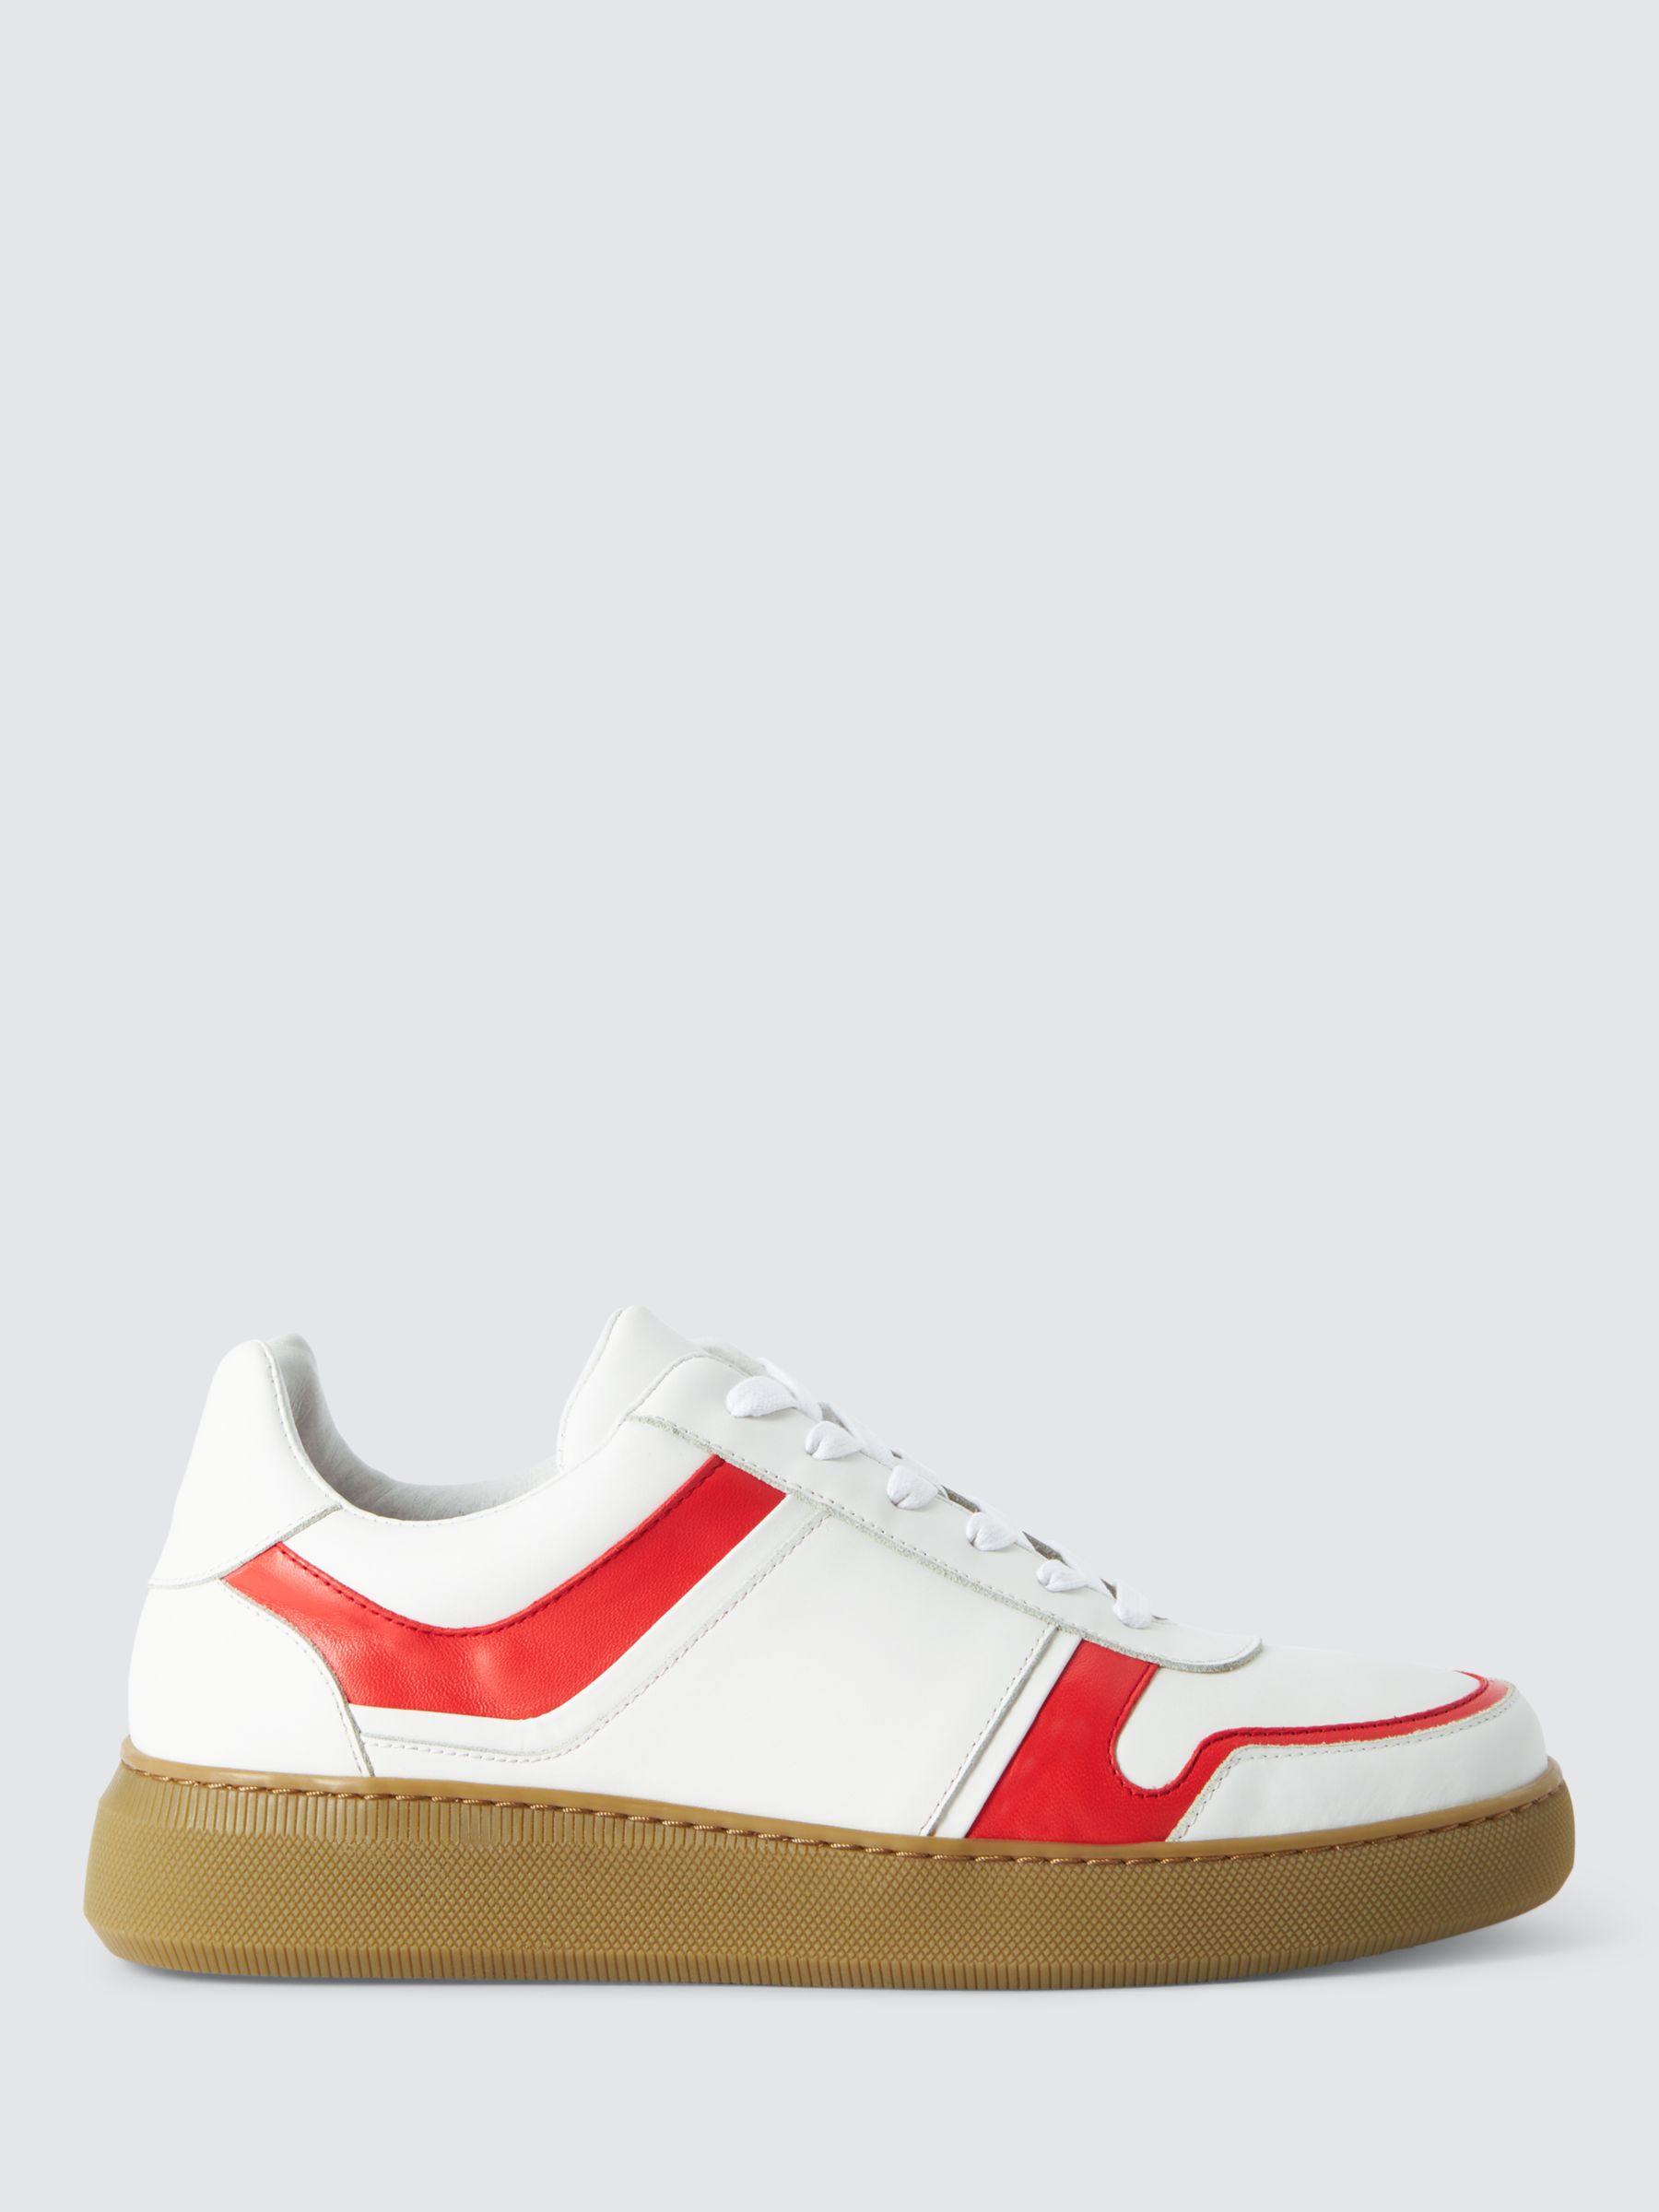 John Lewis Flynne Leather Collegiate Cupsole Trainers, Red at John ...